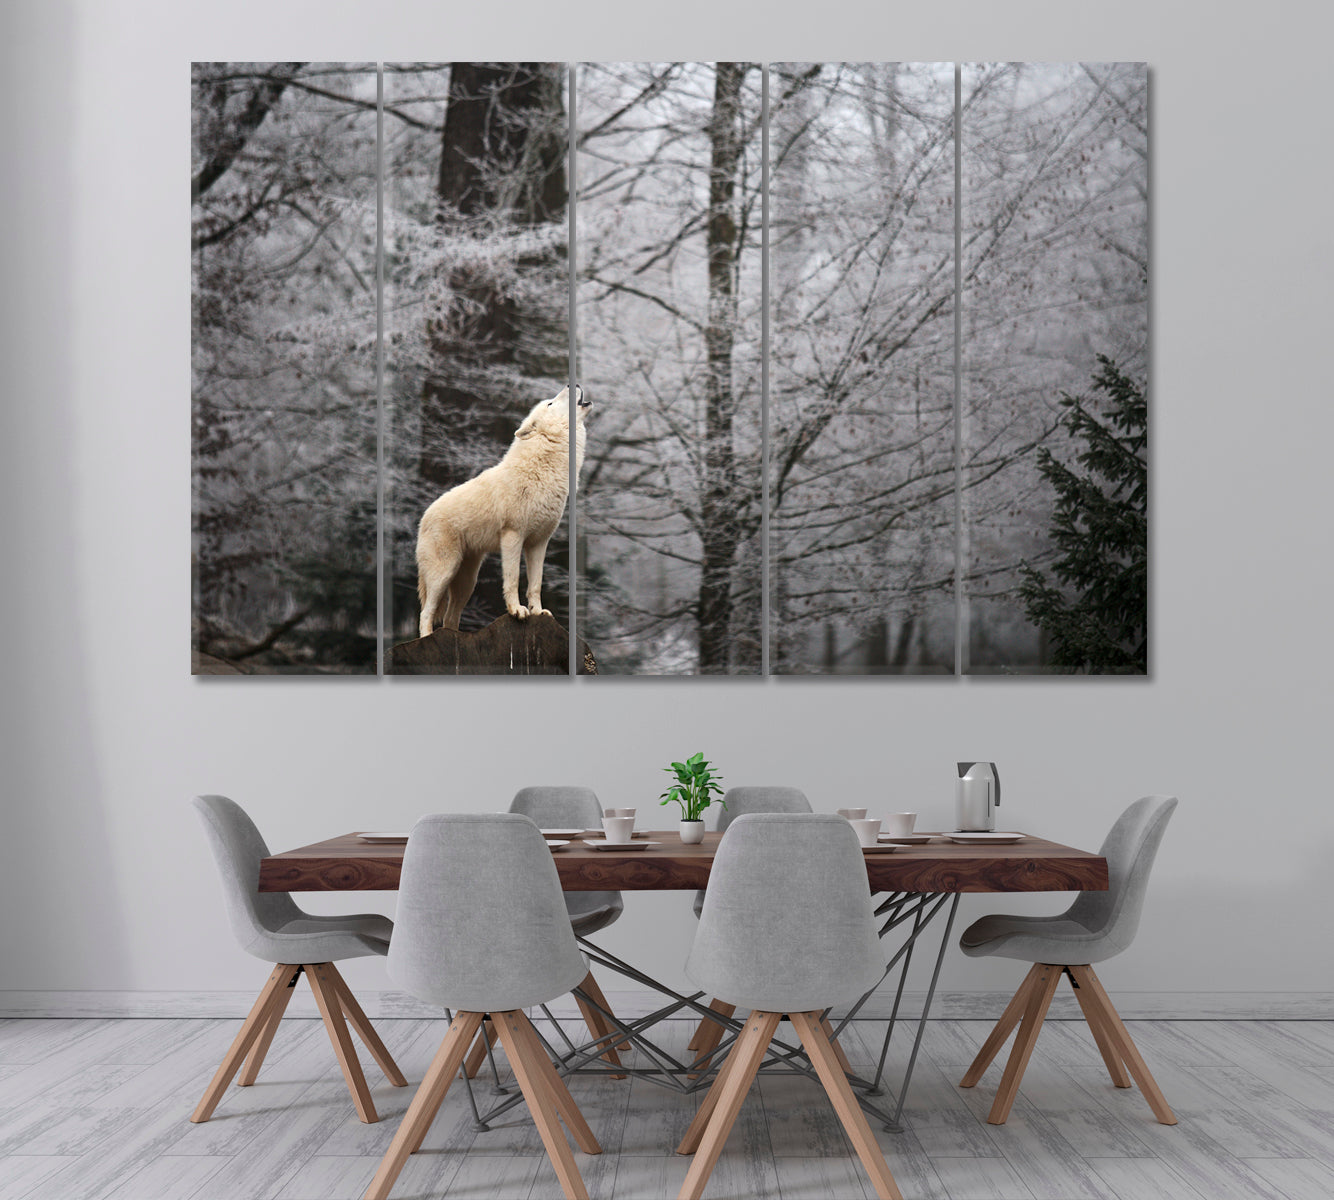 Wolf Howling in Winter Forest Canvas Print ArtLexy 5 Panels 36"x24" inches 